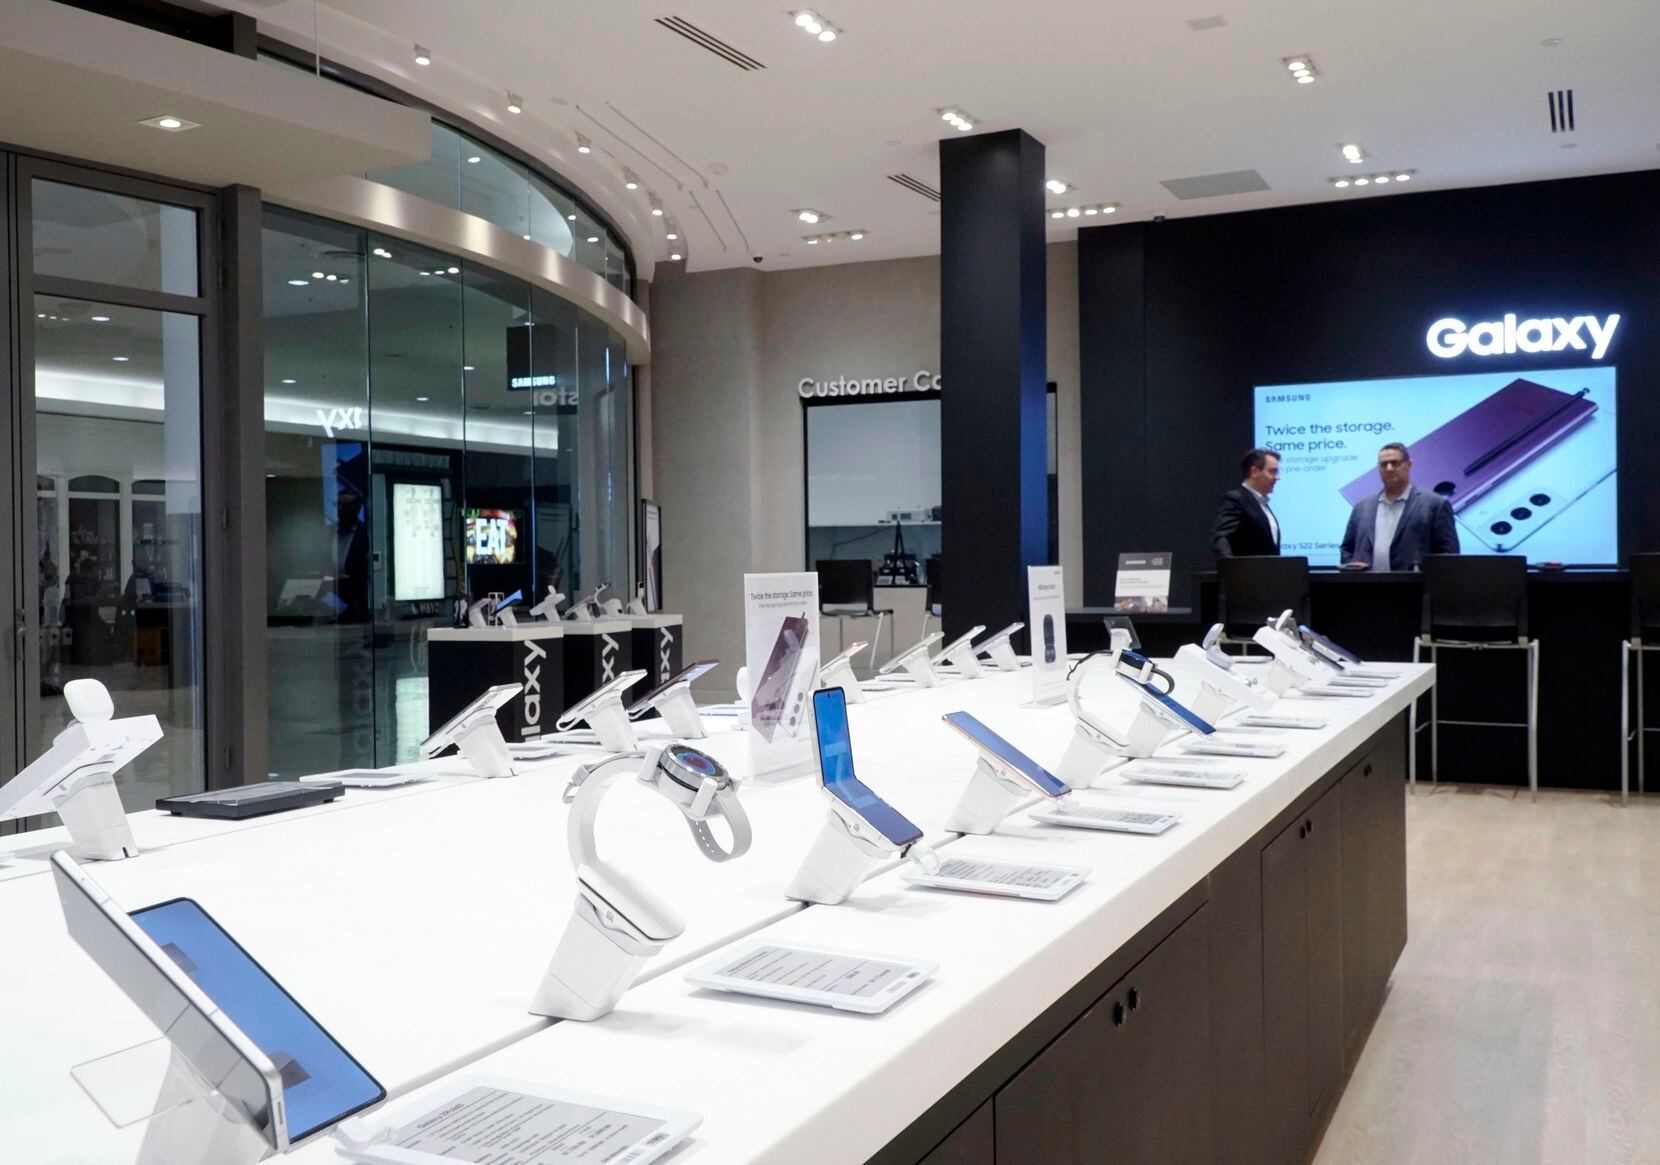 Products are displayed at the new Samsung experience store on Level 1 of Stonebriar Centre...